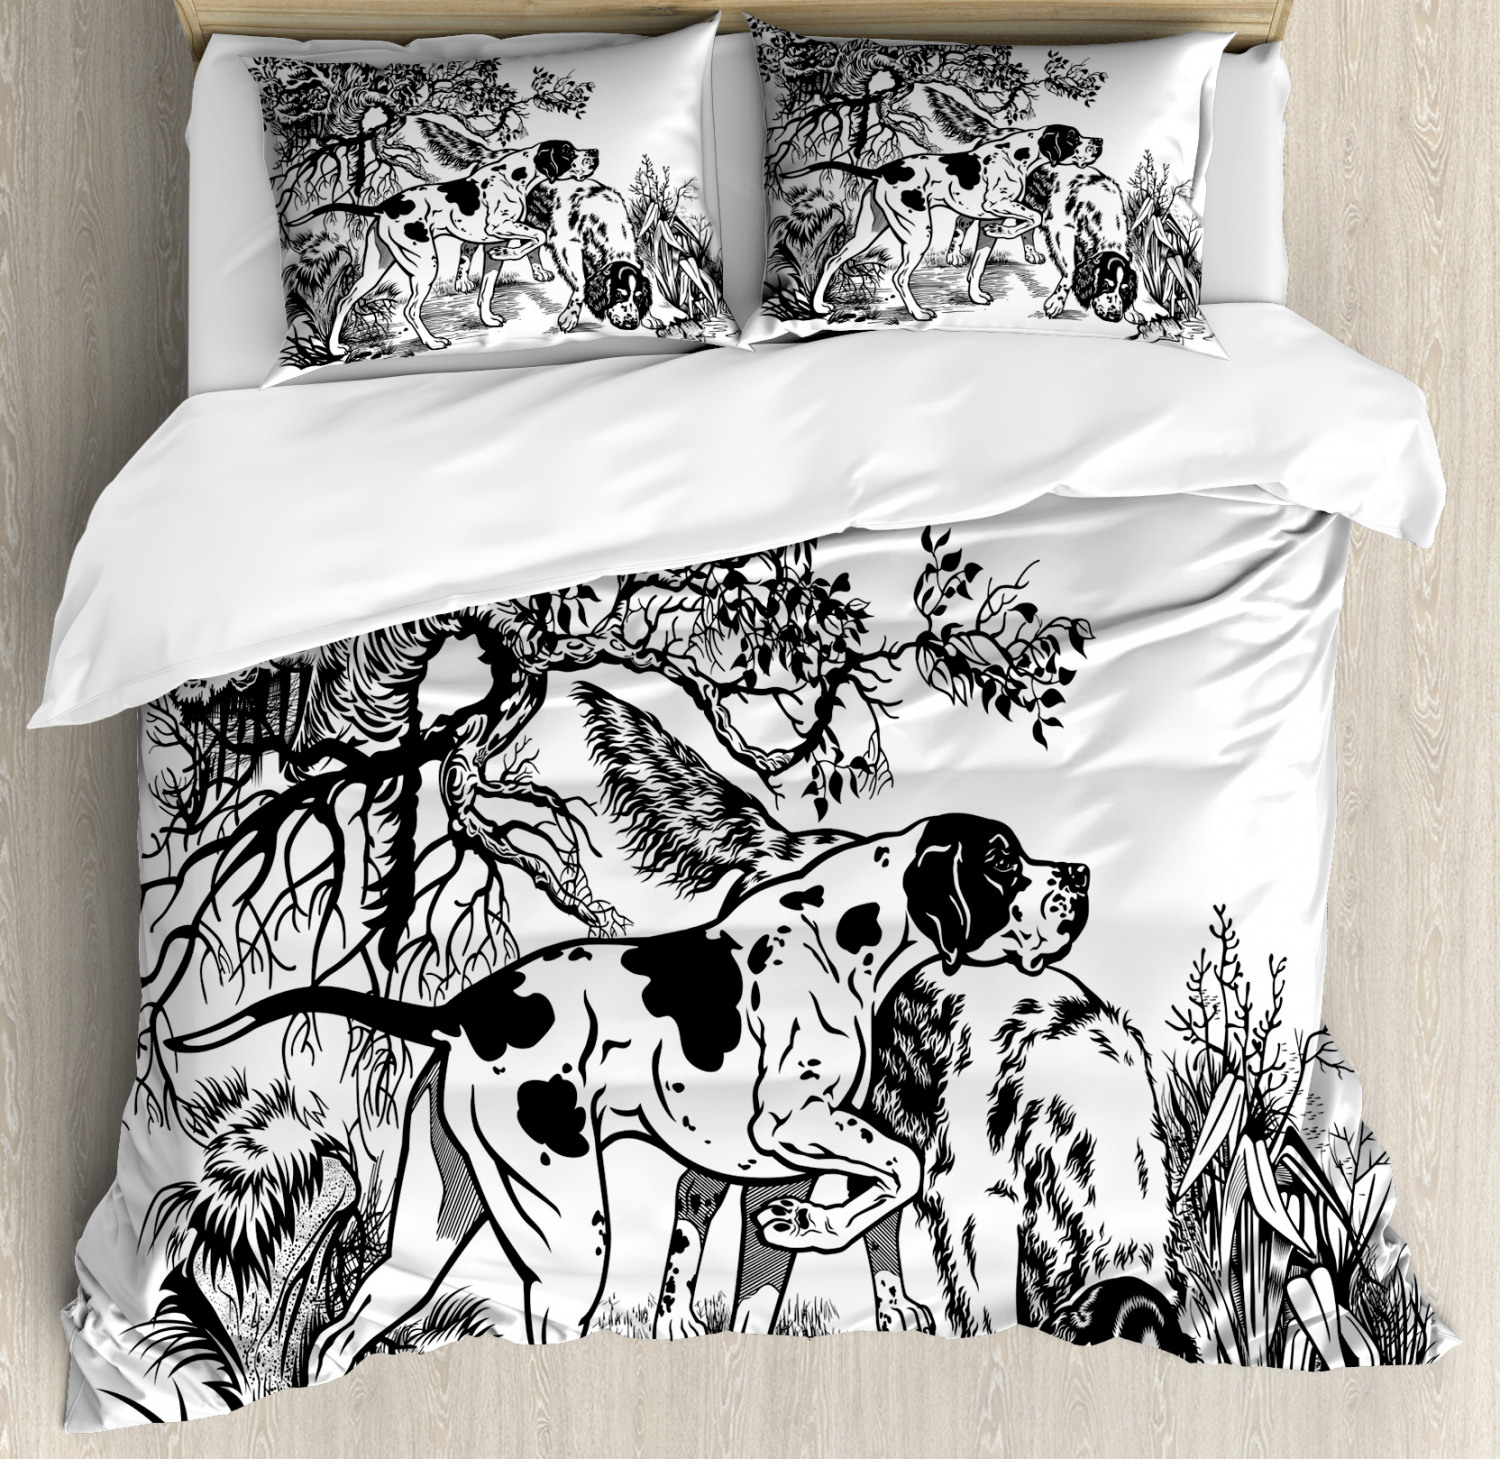 Hunting Duvet Cover Set With Pillow Shams Dogs In Forest Print Ebay